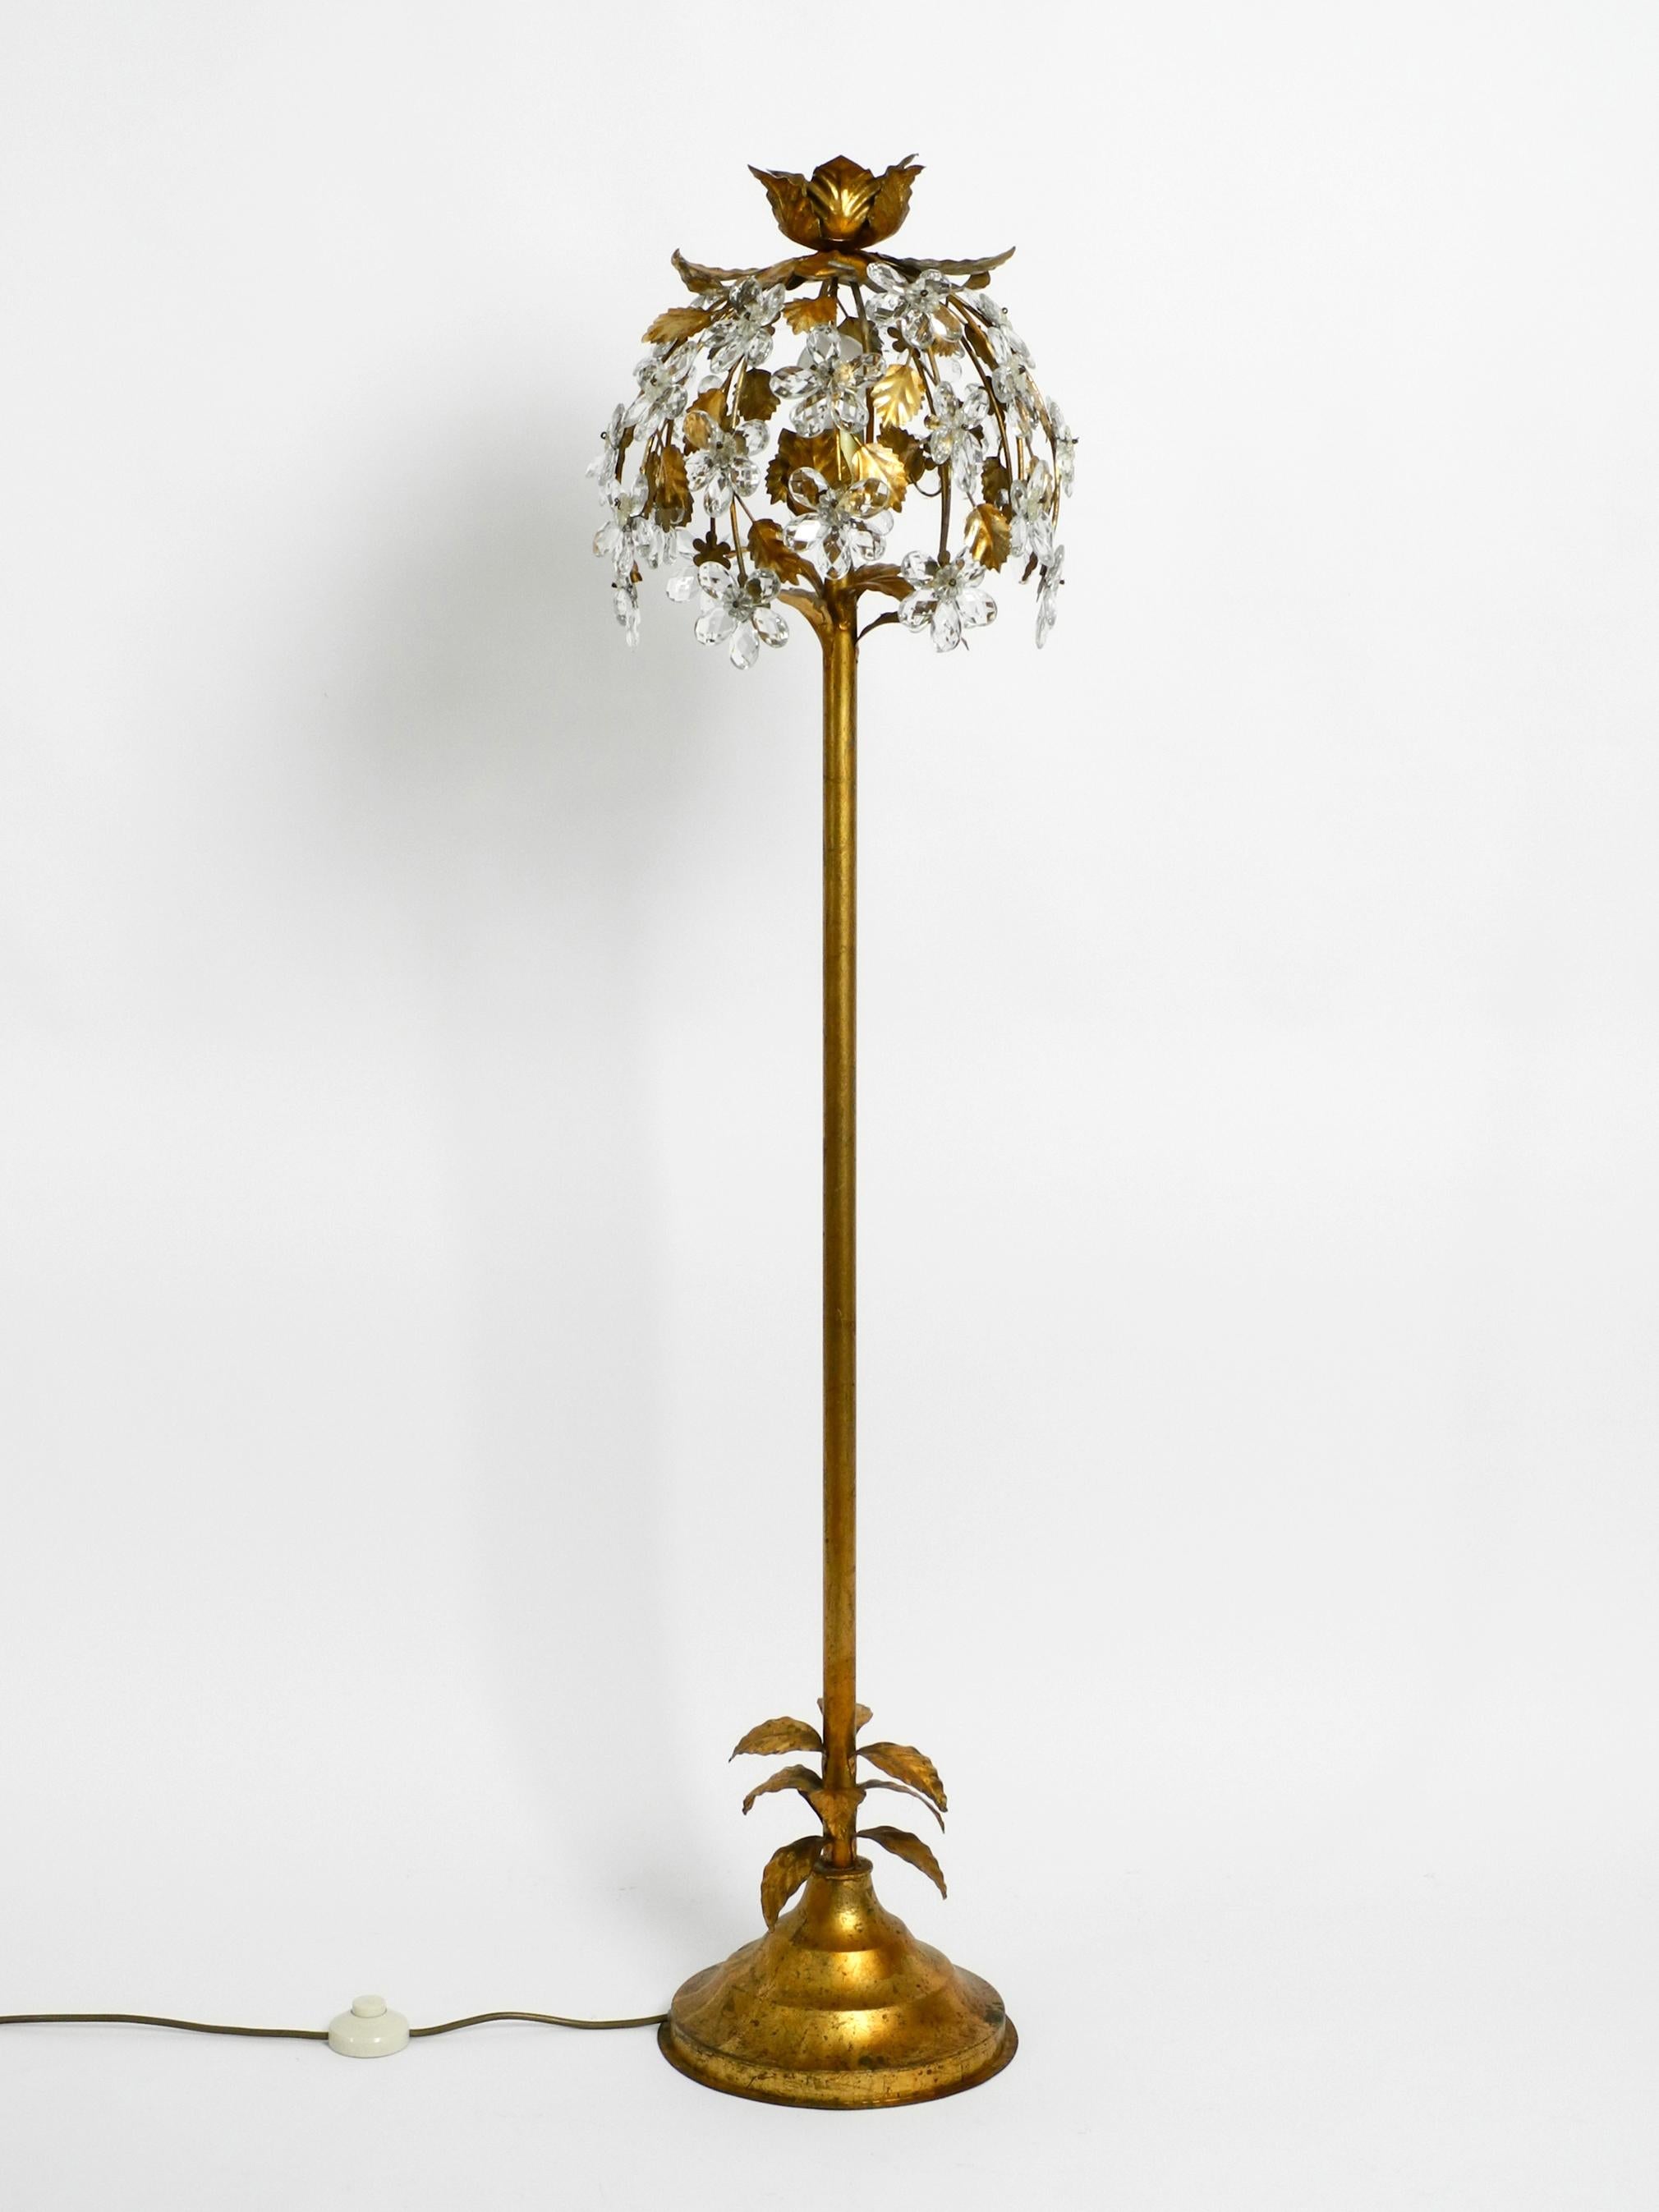 1960s Gold-Plated Florentine Floor Lamp by Banci Firenze with Crystal Stones 4